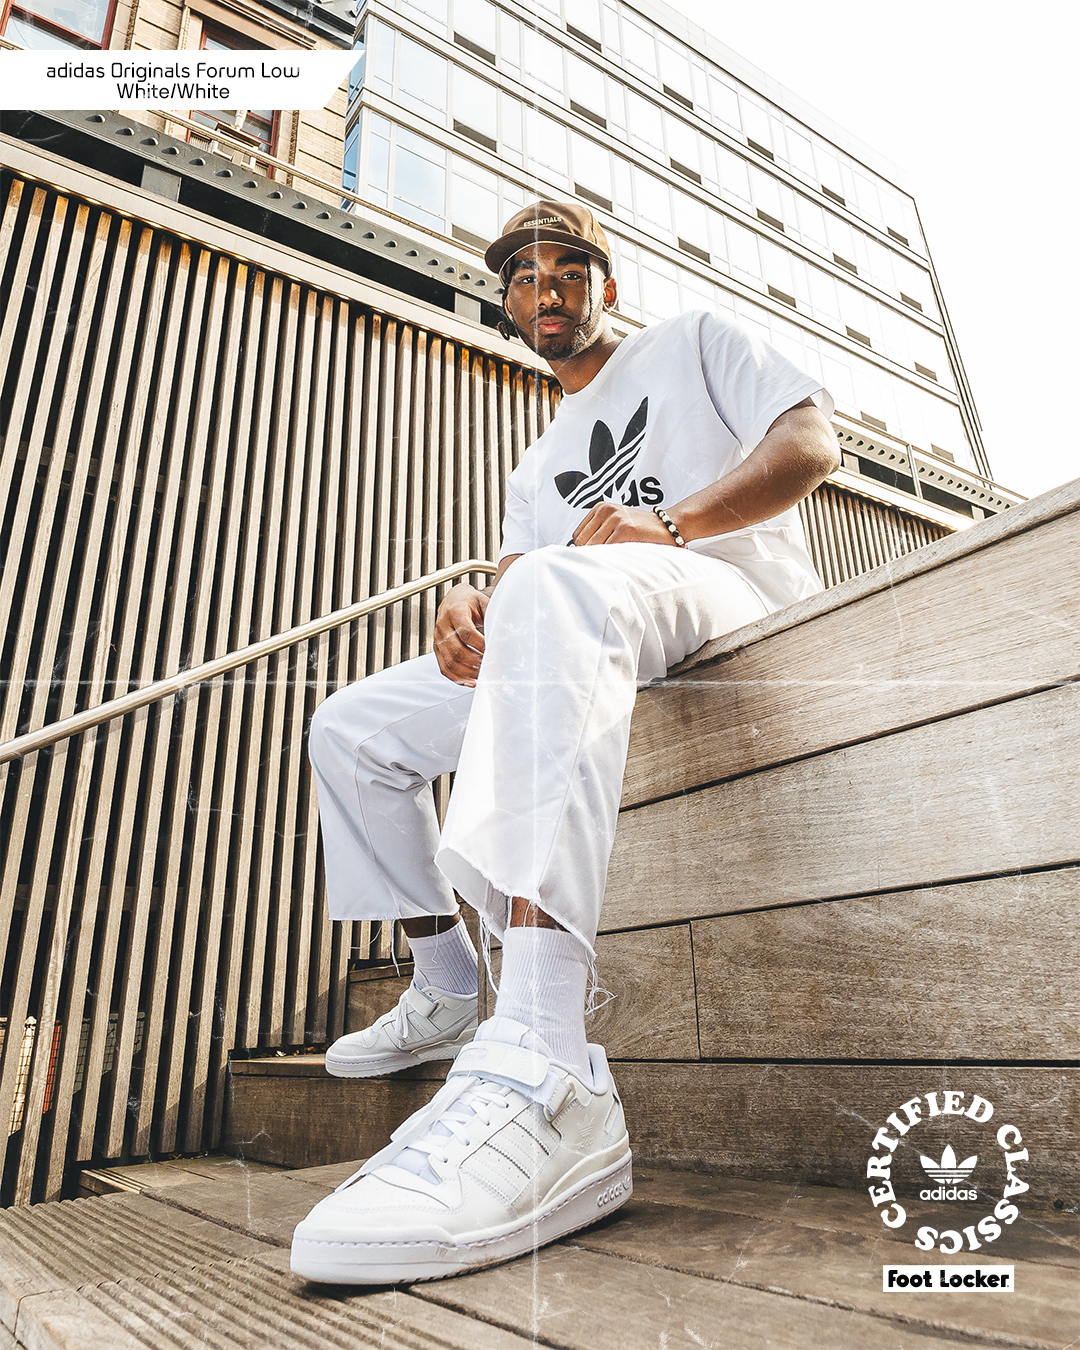 Foot Locker Canada on Twitter: "Fresh Forum feeling 🤩 Classic #adidas  Forum Low styles available in-stores and online! #CertifiedClassics  https://t.co/SQt6VAbYsJ https://t.co/esJgf8m65H" / Twitter